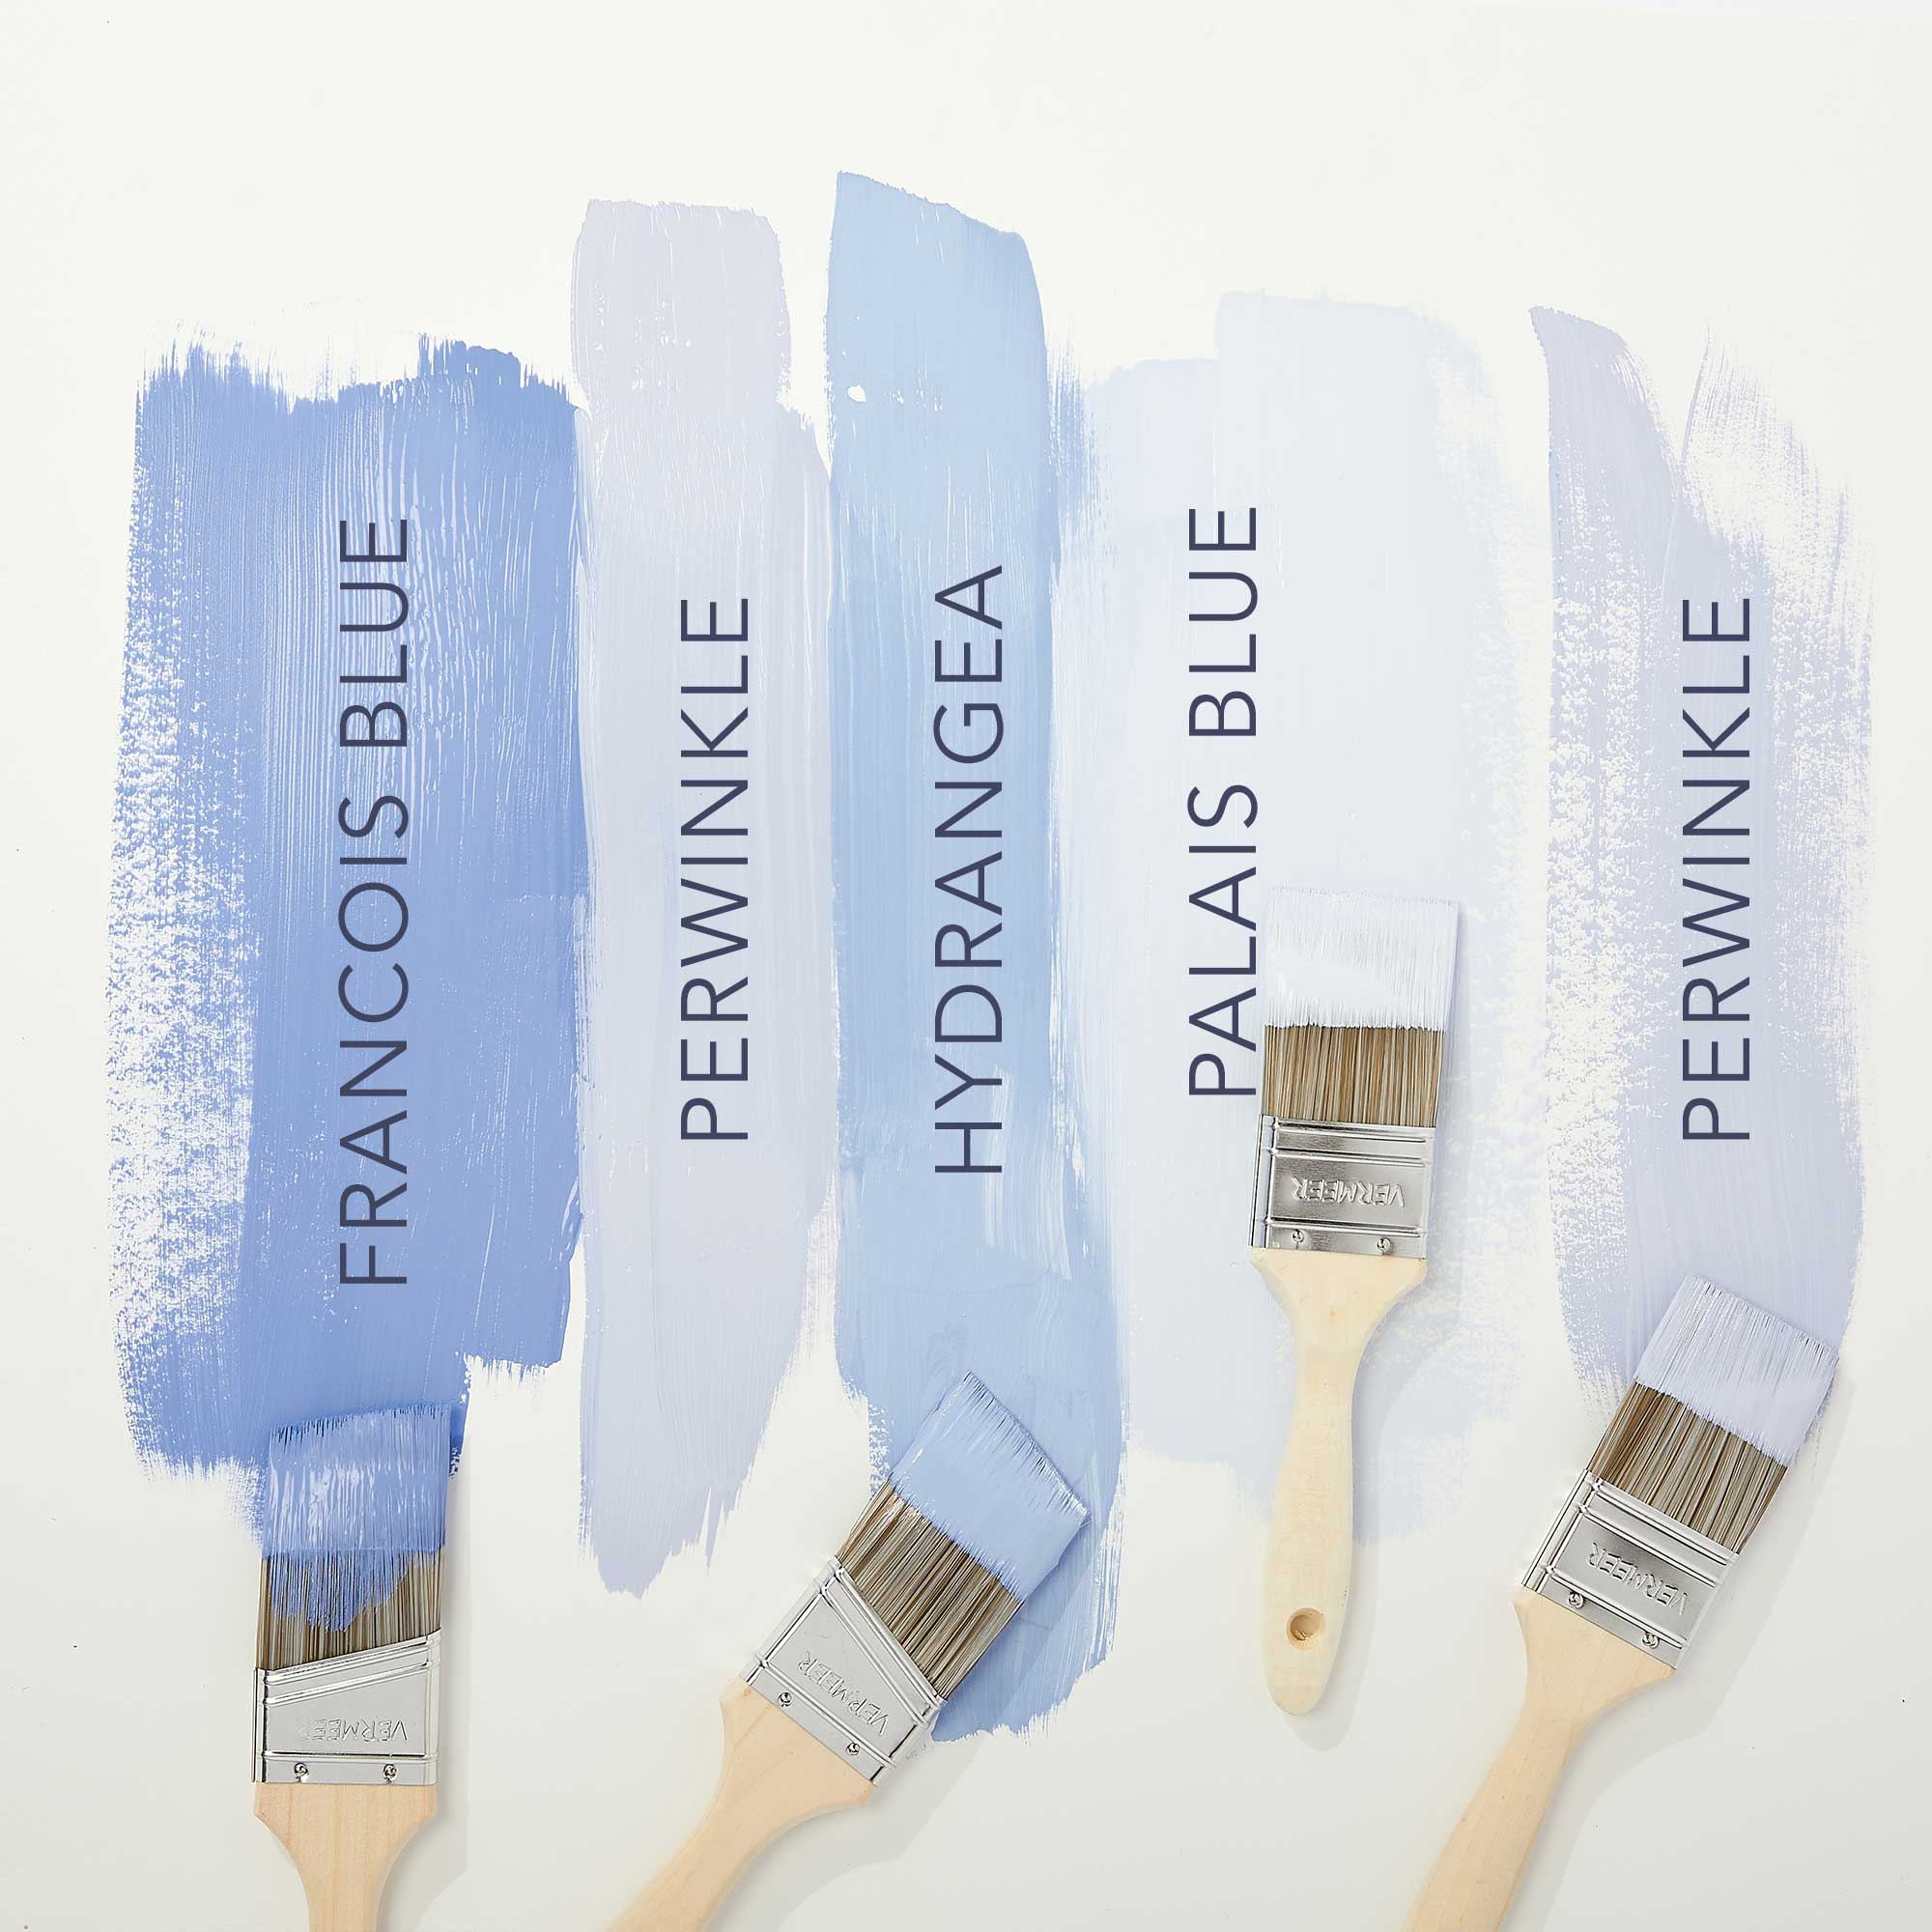 Jolie Home paint brand makes its Canadian debut - Canadian Interiors